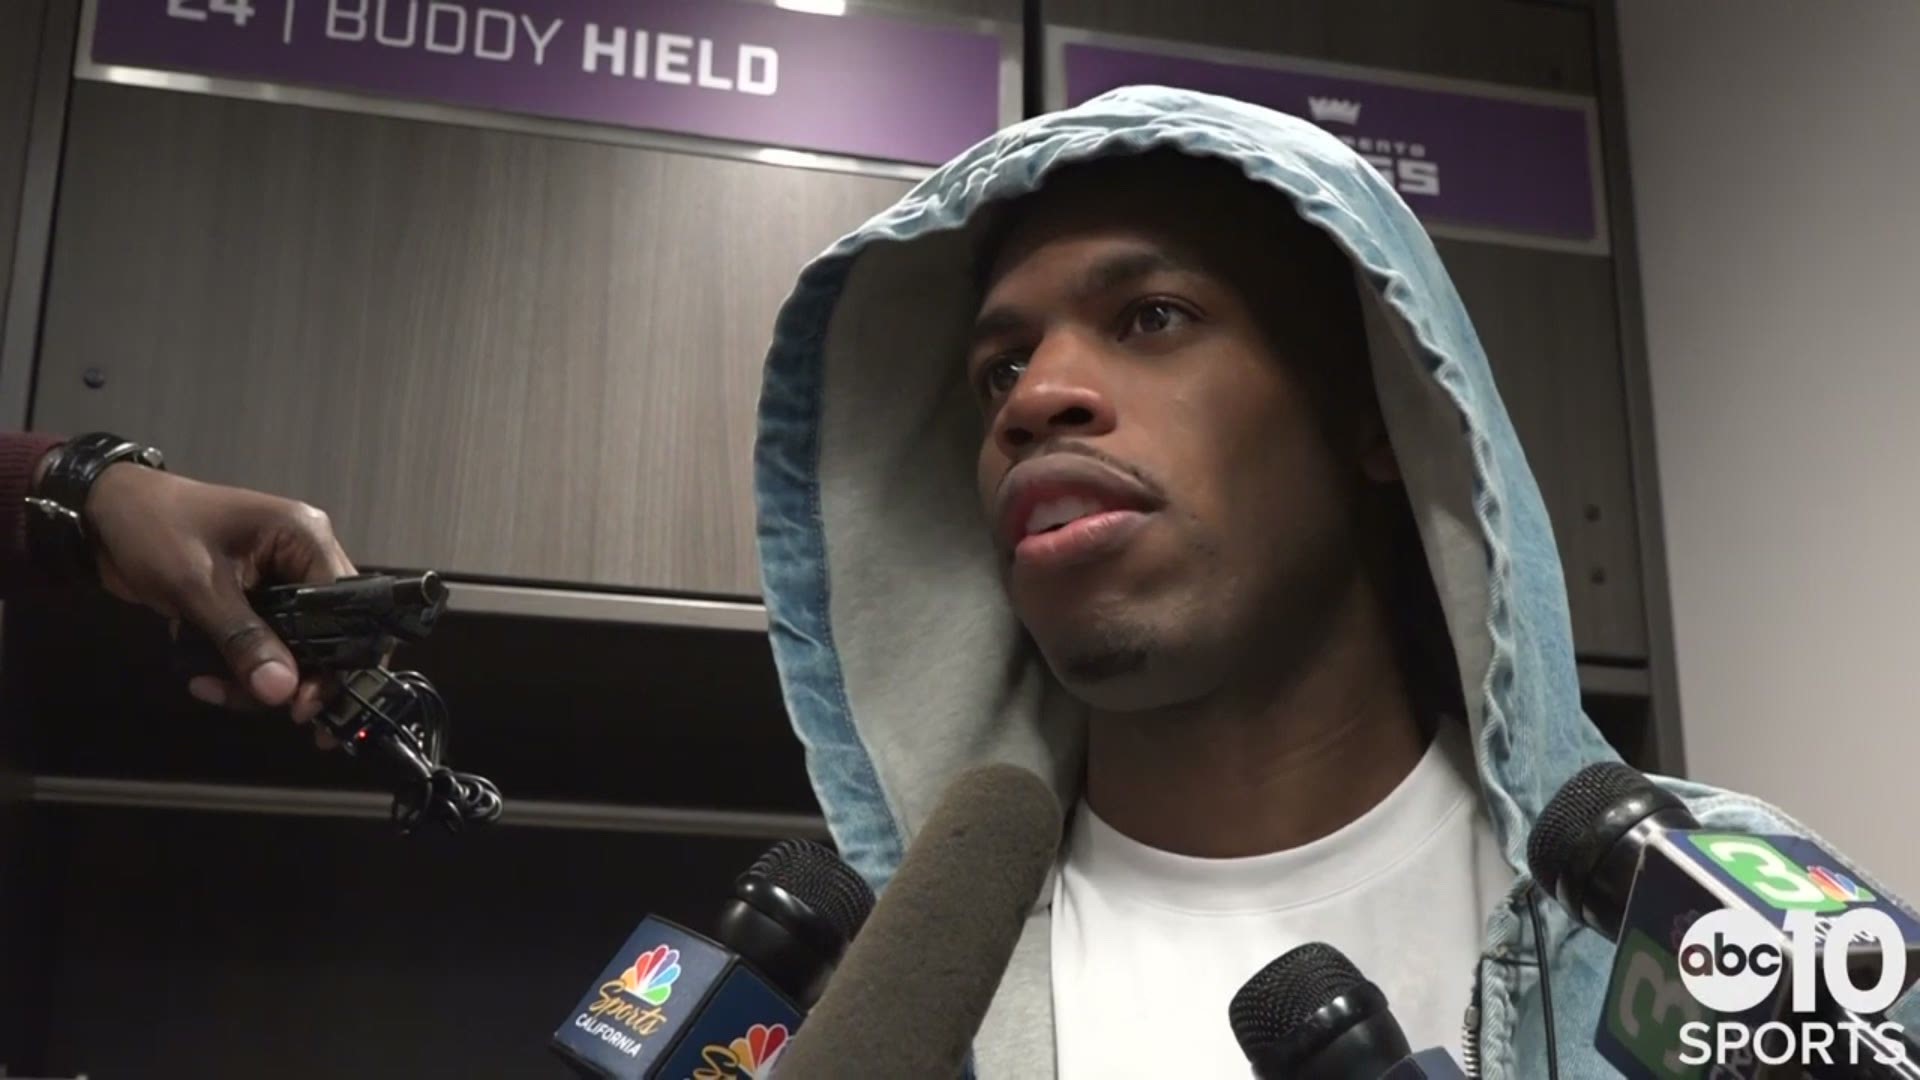 Buddy Hield talks about the Kings' 105-87 loss to the Los Angeles Clippers, dropping their eighth straight game & Sacramento falling 10 games under the .500 mark.